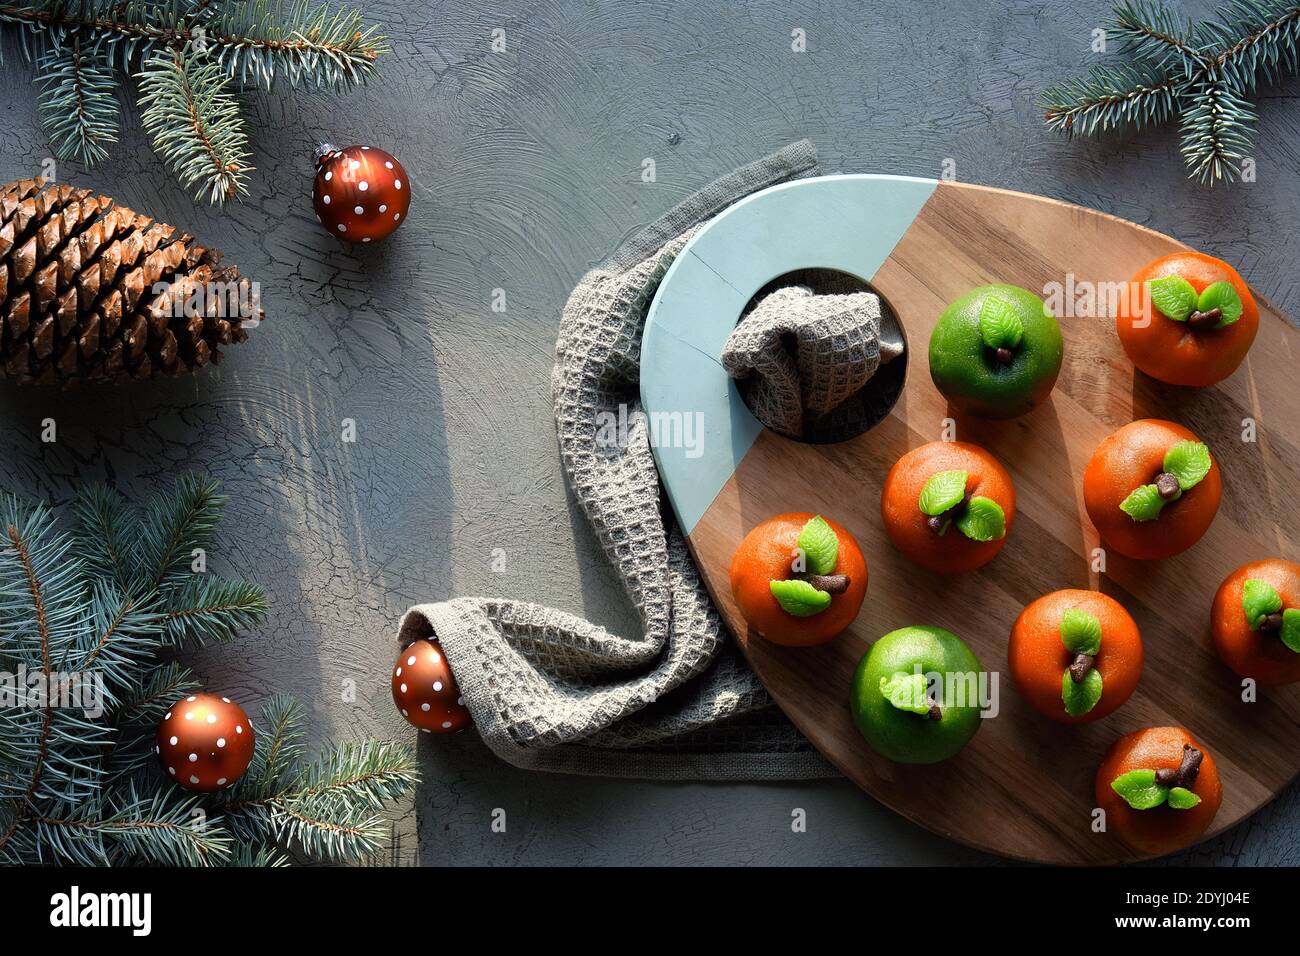 Marzipan sponge apples. Christmas dessert on wooden board. Cup of tea, fir twigs, red toys and pine cone. Top view on textile towel. Stock Photo